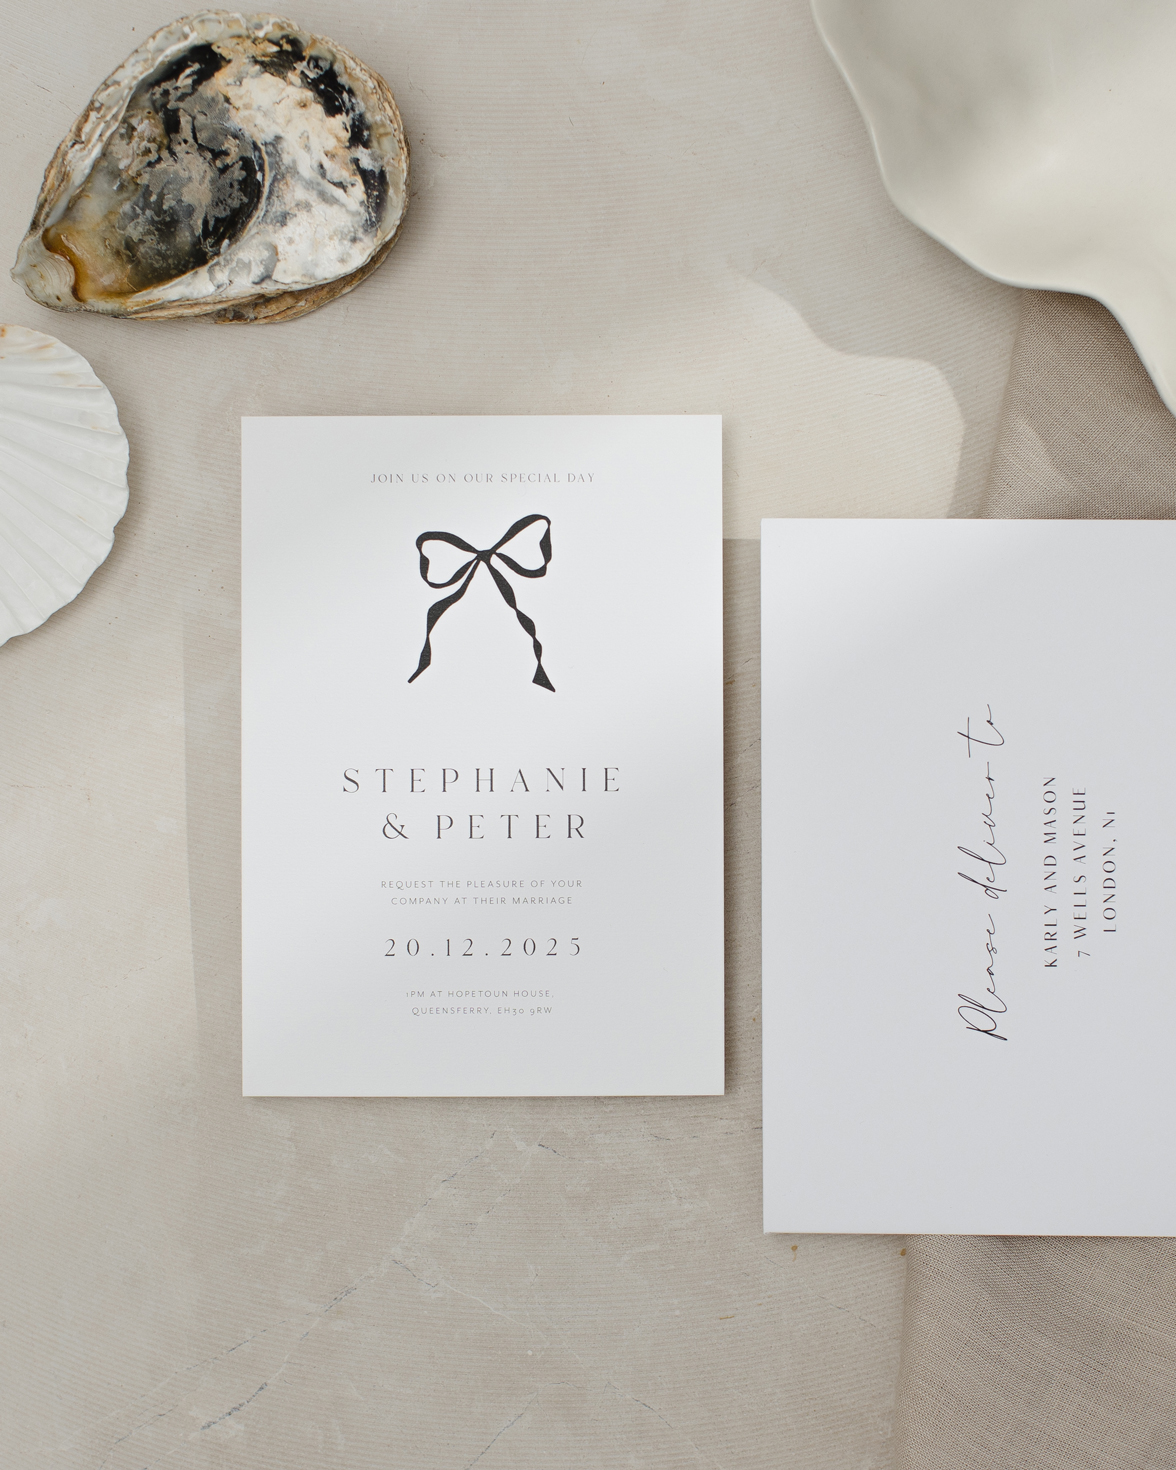 White and black wedding invitation with hand drawn bow. White address envelope in script font